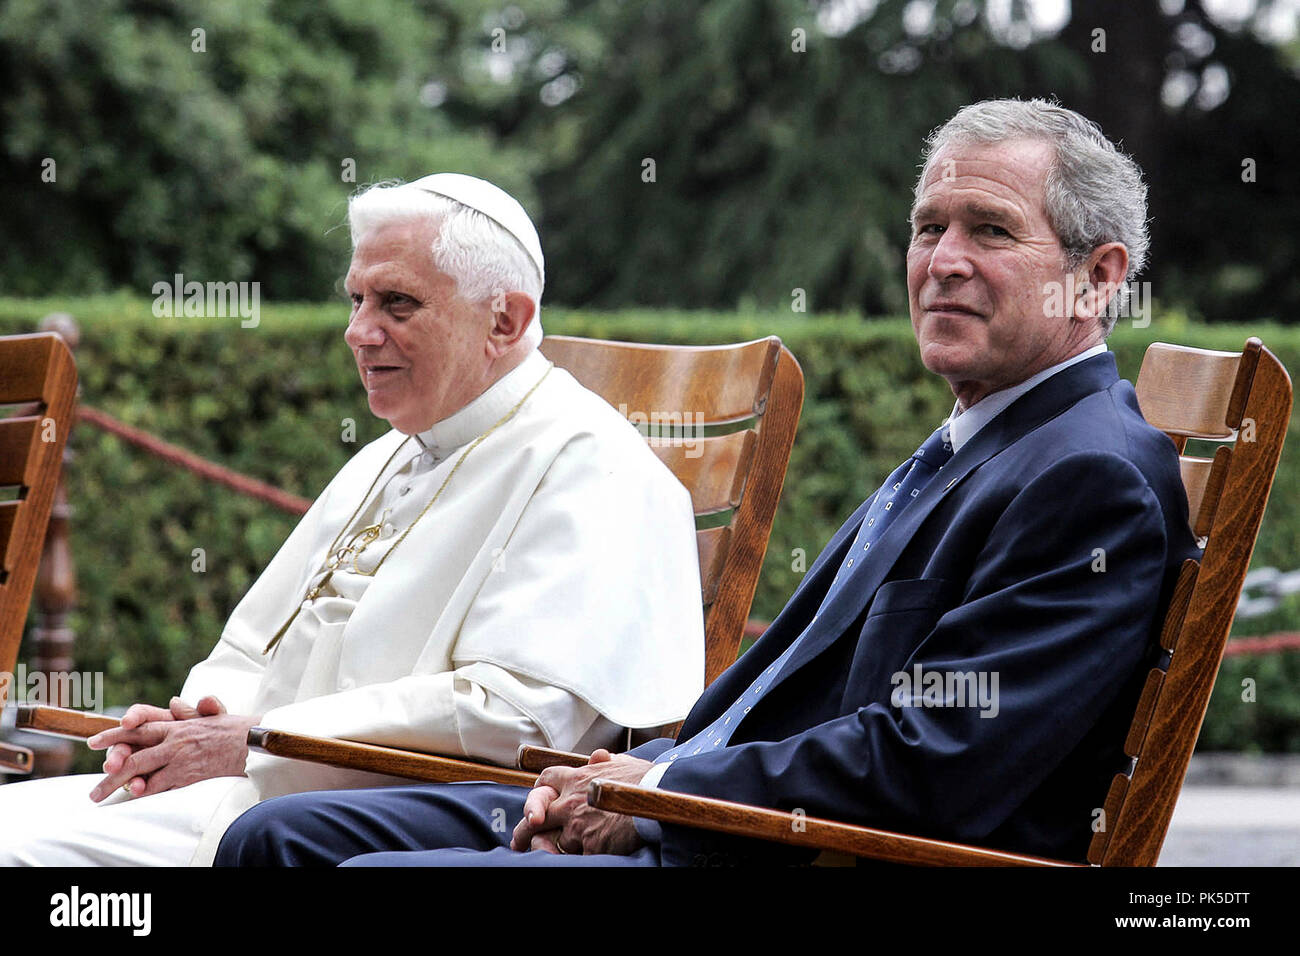 Benedict XVI meet George W.Bush  Vatican City, Vatican Gardens 13 06 2008.Sua Holiness' Pope Benedict XVI received in audience with U.S. President George W. Bush, for the first time in the unique setting of the Tower of St. John in the Vatican Gardens. pictured from left: the Pres Bush, the Holy Father, before the copy of the Lourdes Grotto. Stock Photo